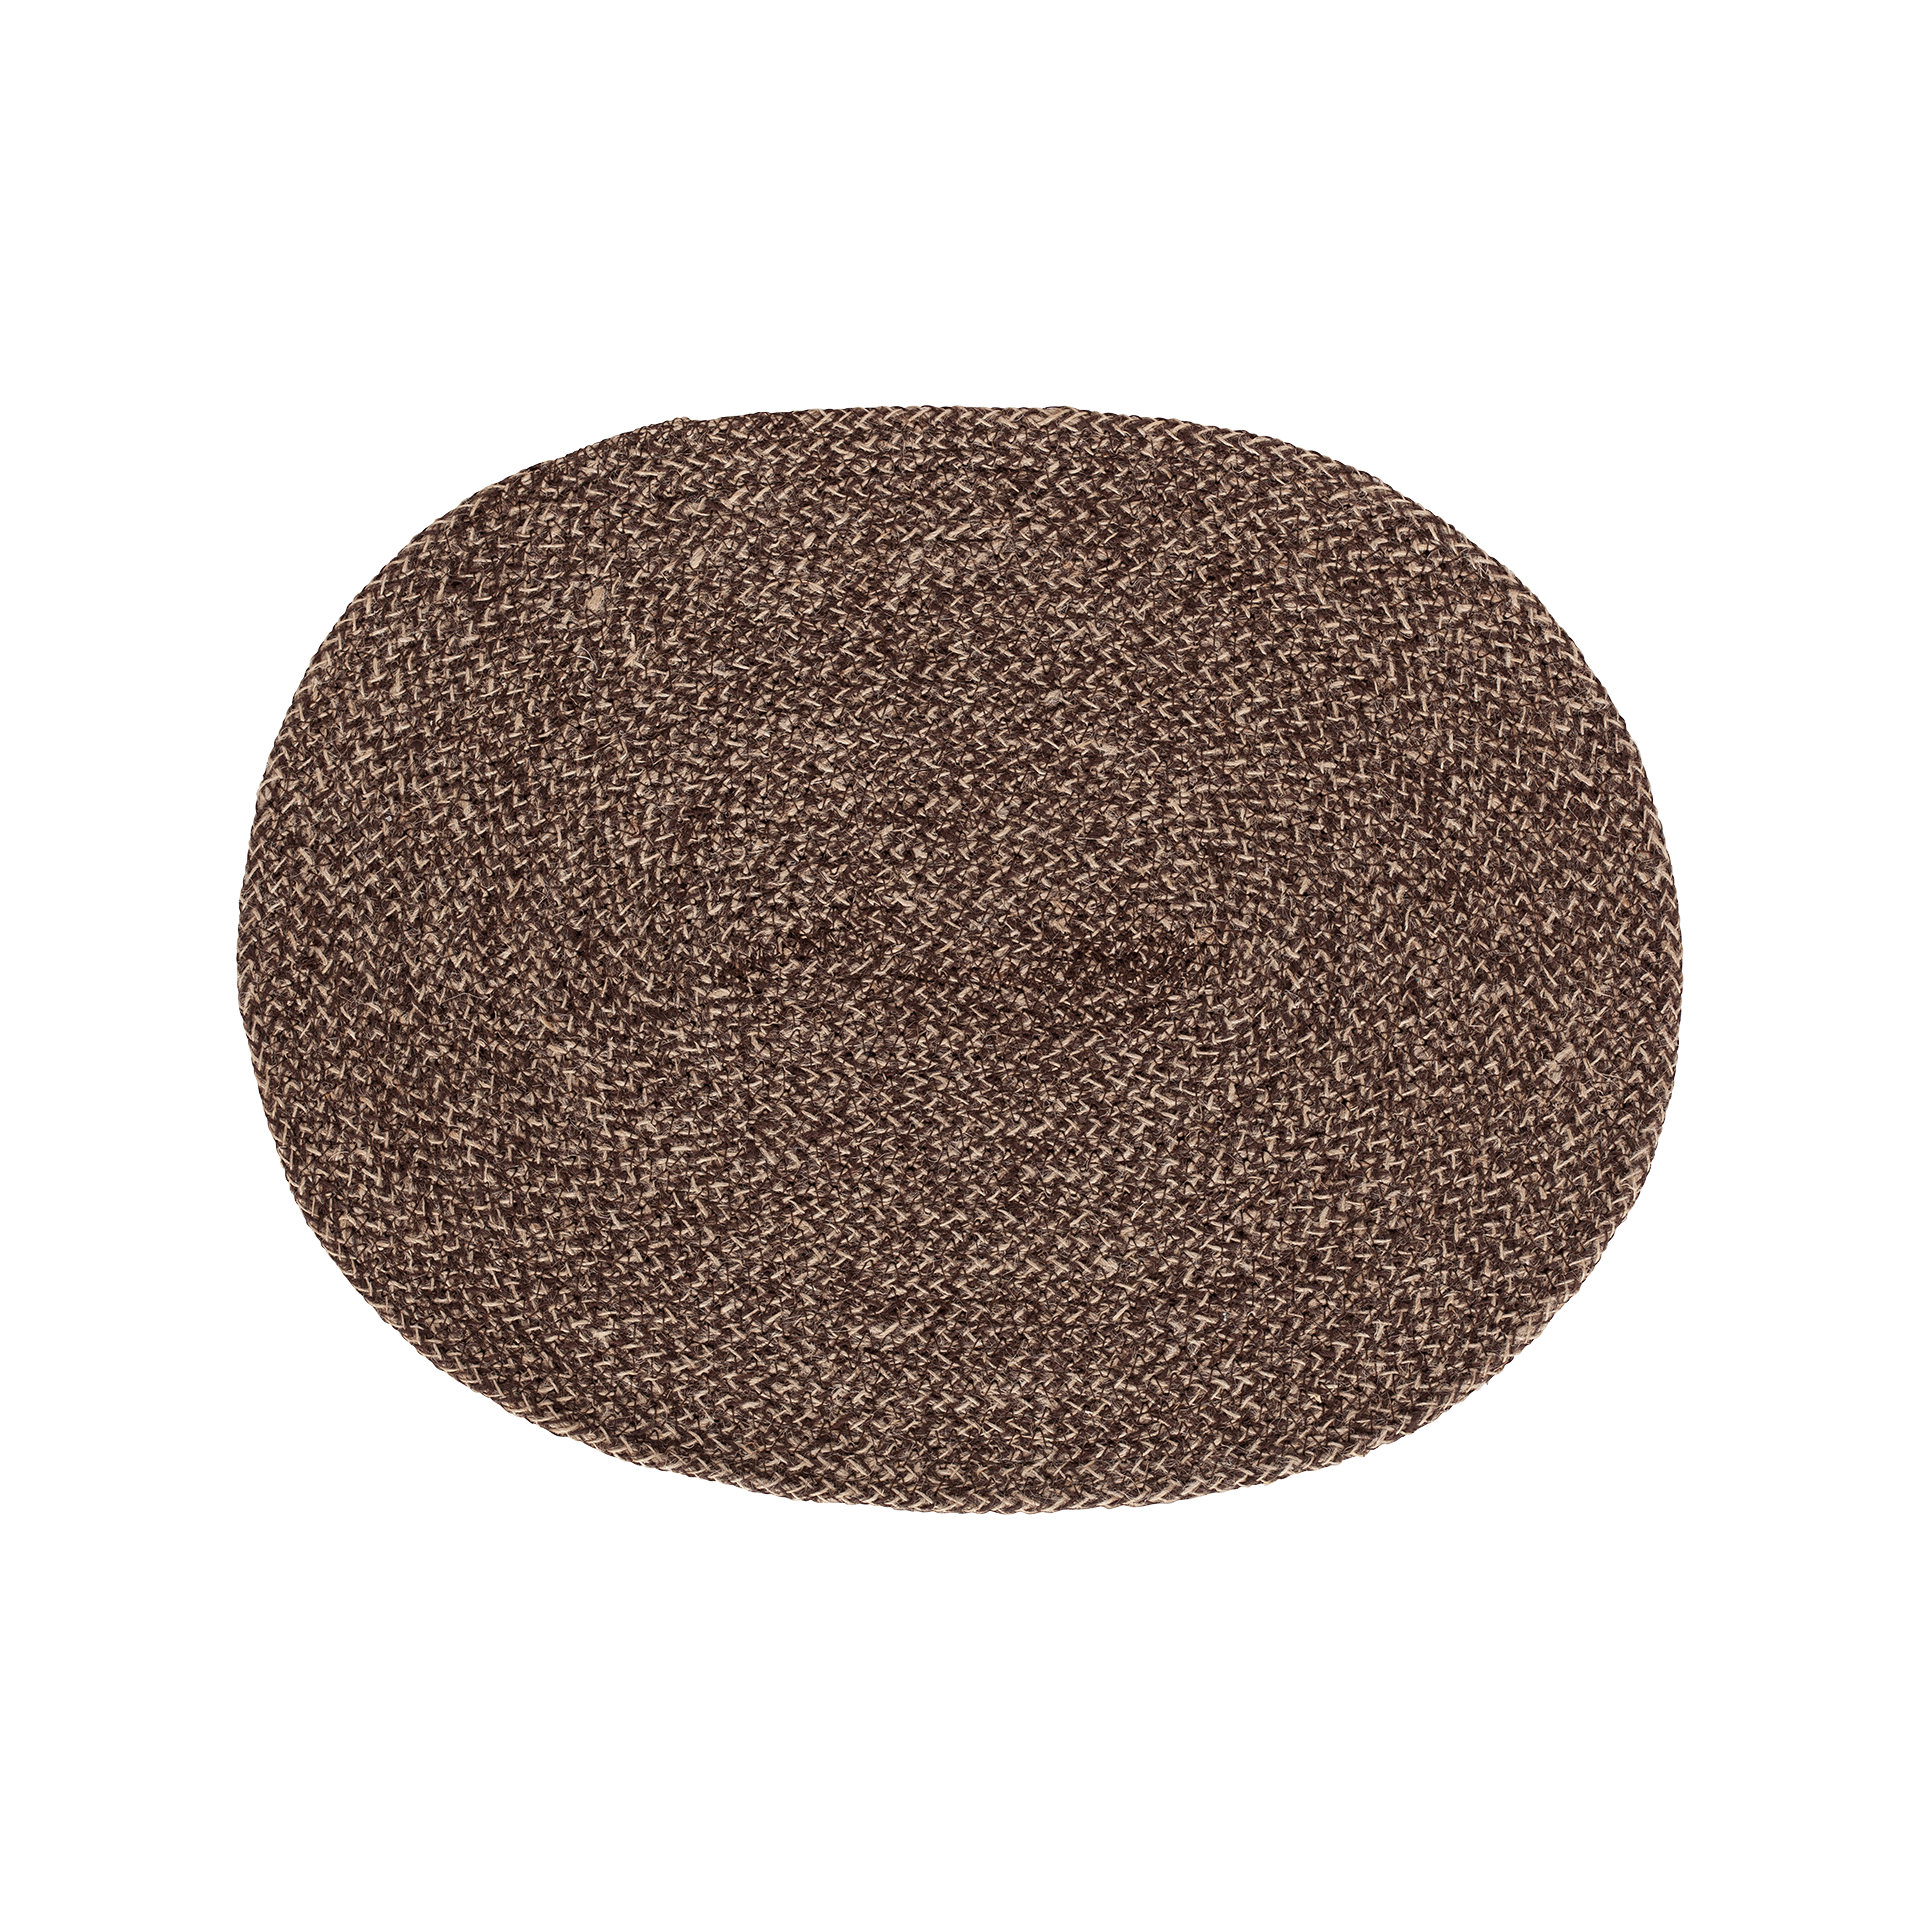 Placemat Ella brown/natural oval